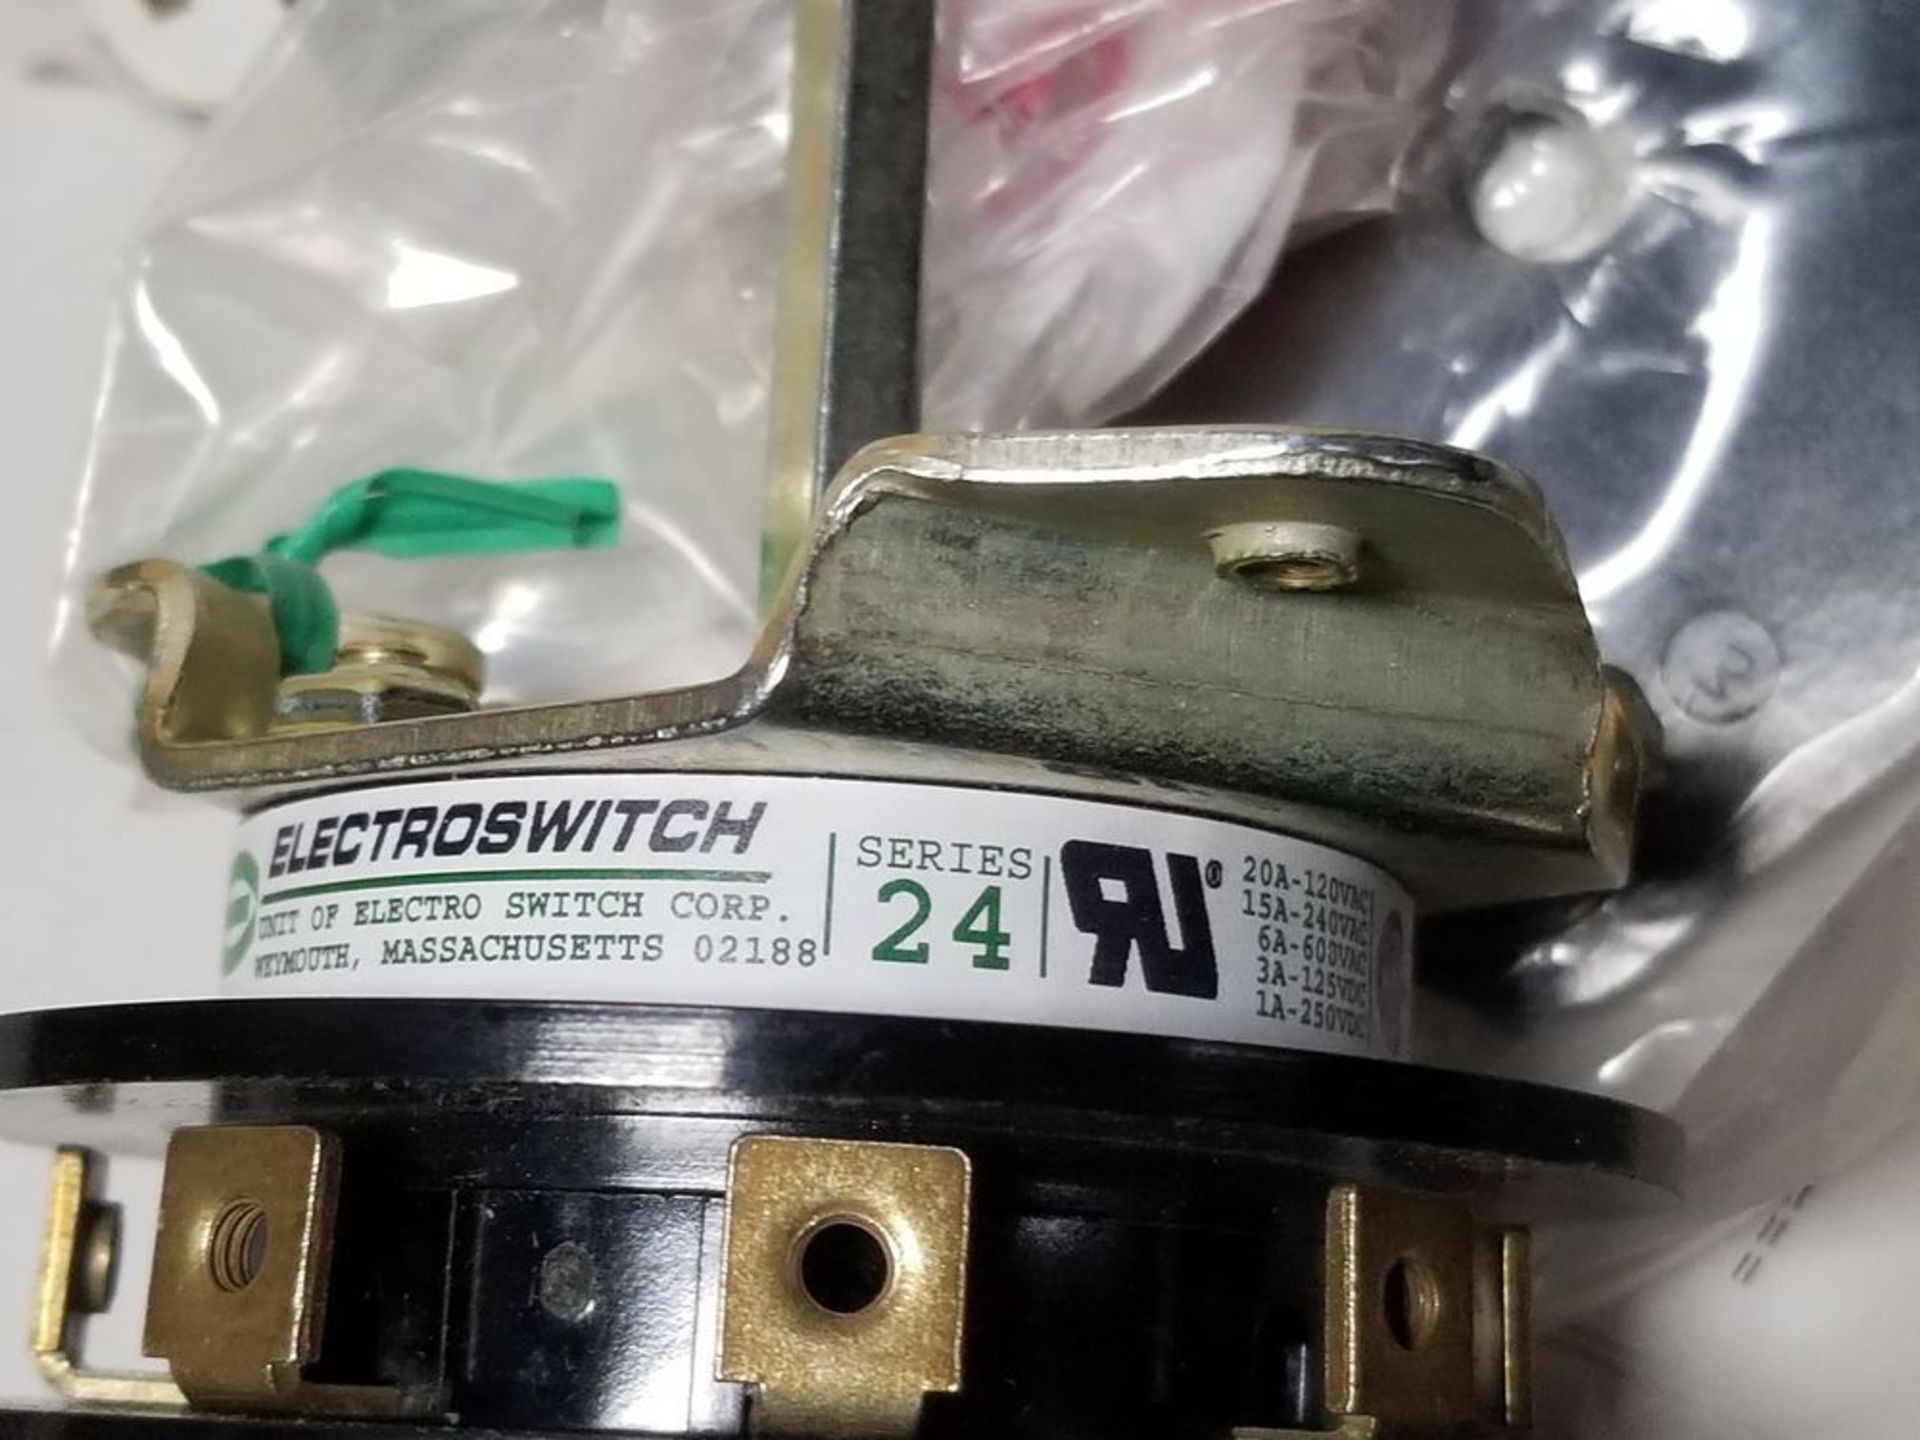 NEW ELECTROSWITCH SERIES 24 ROTARY CONTROL SWITCH - Image 6 of 8